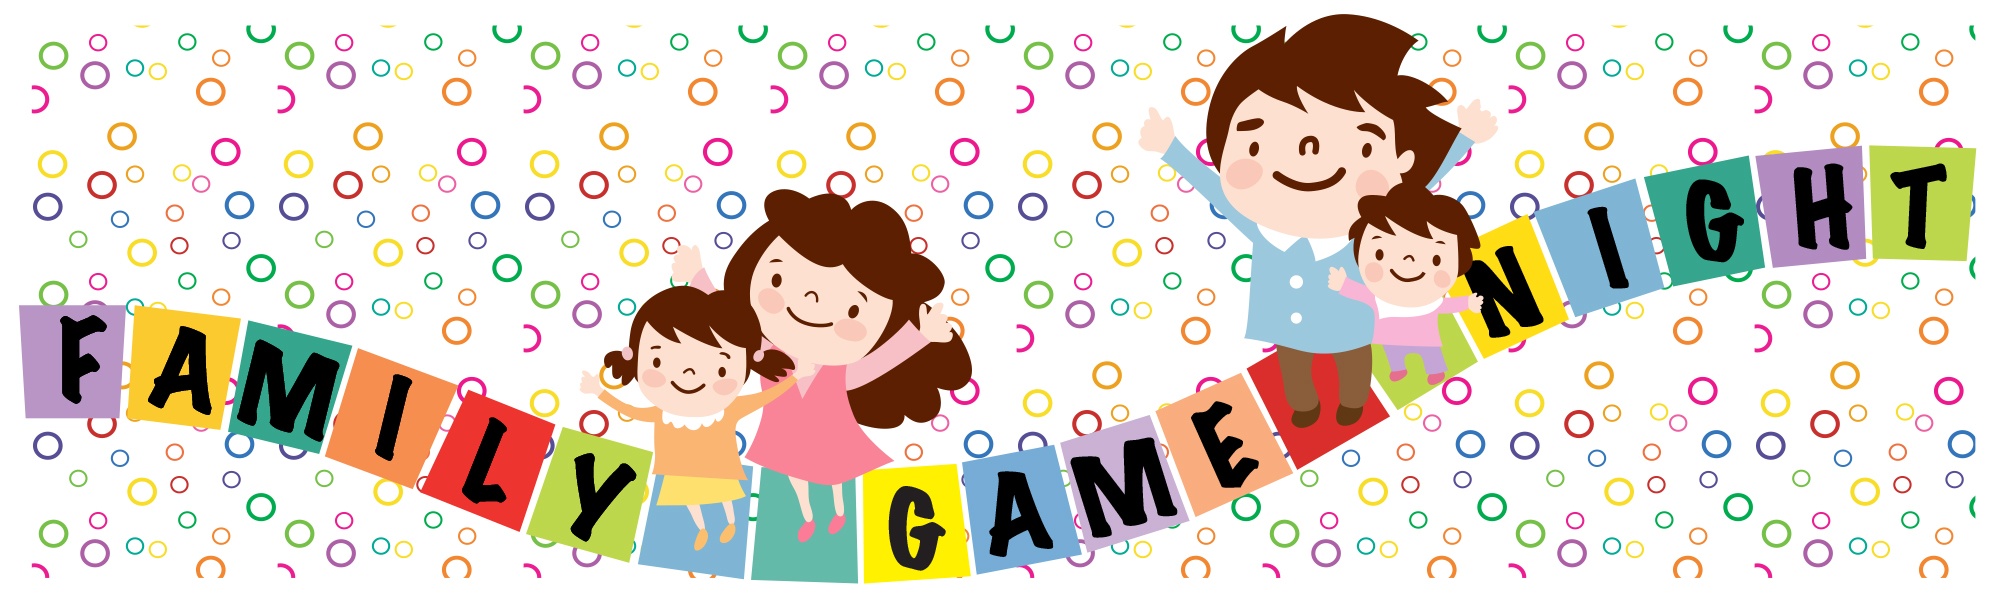 family games clipart - photo #27